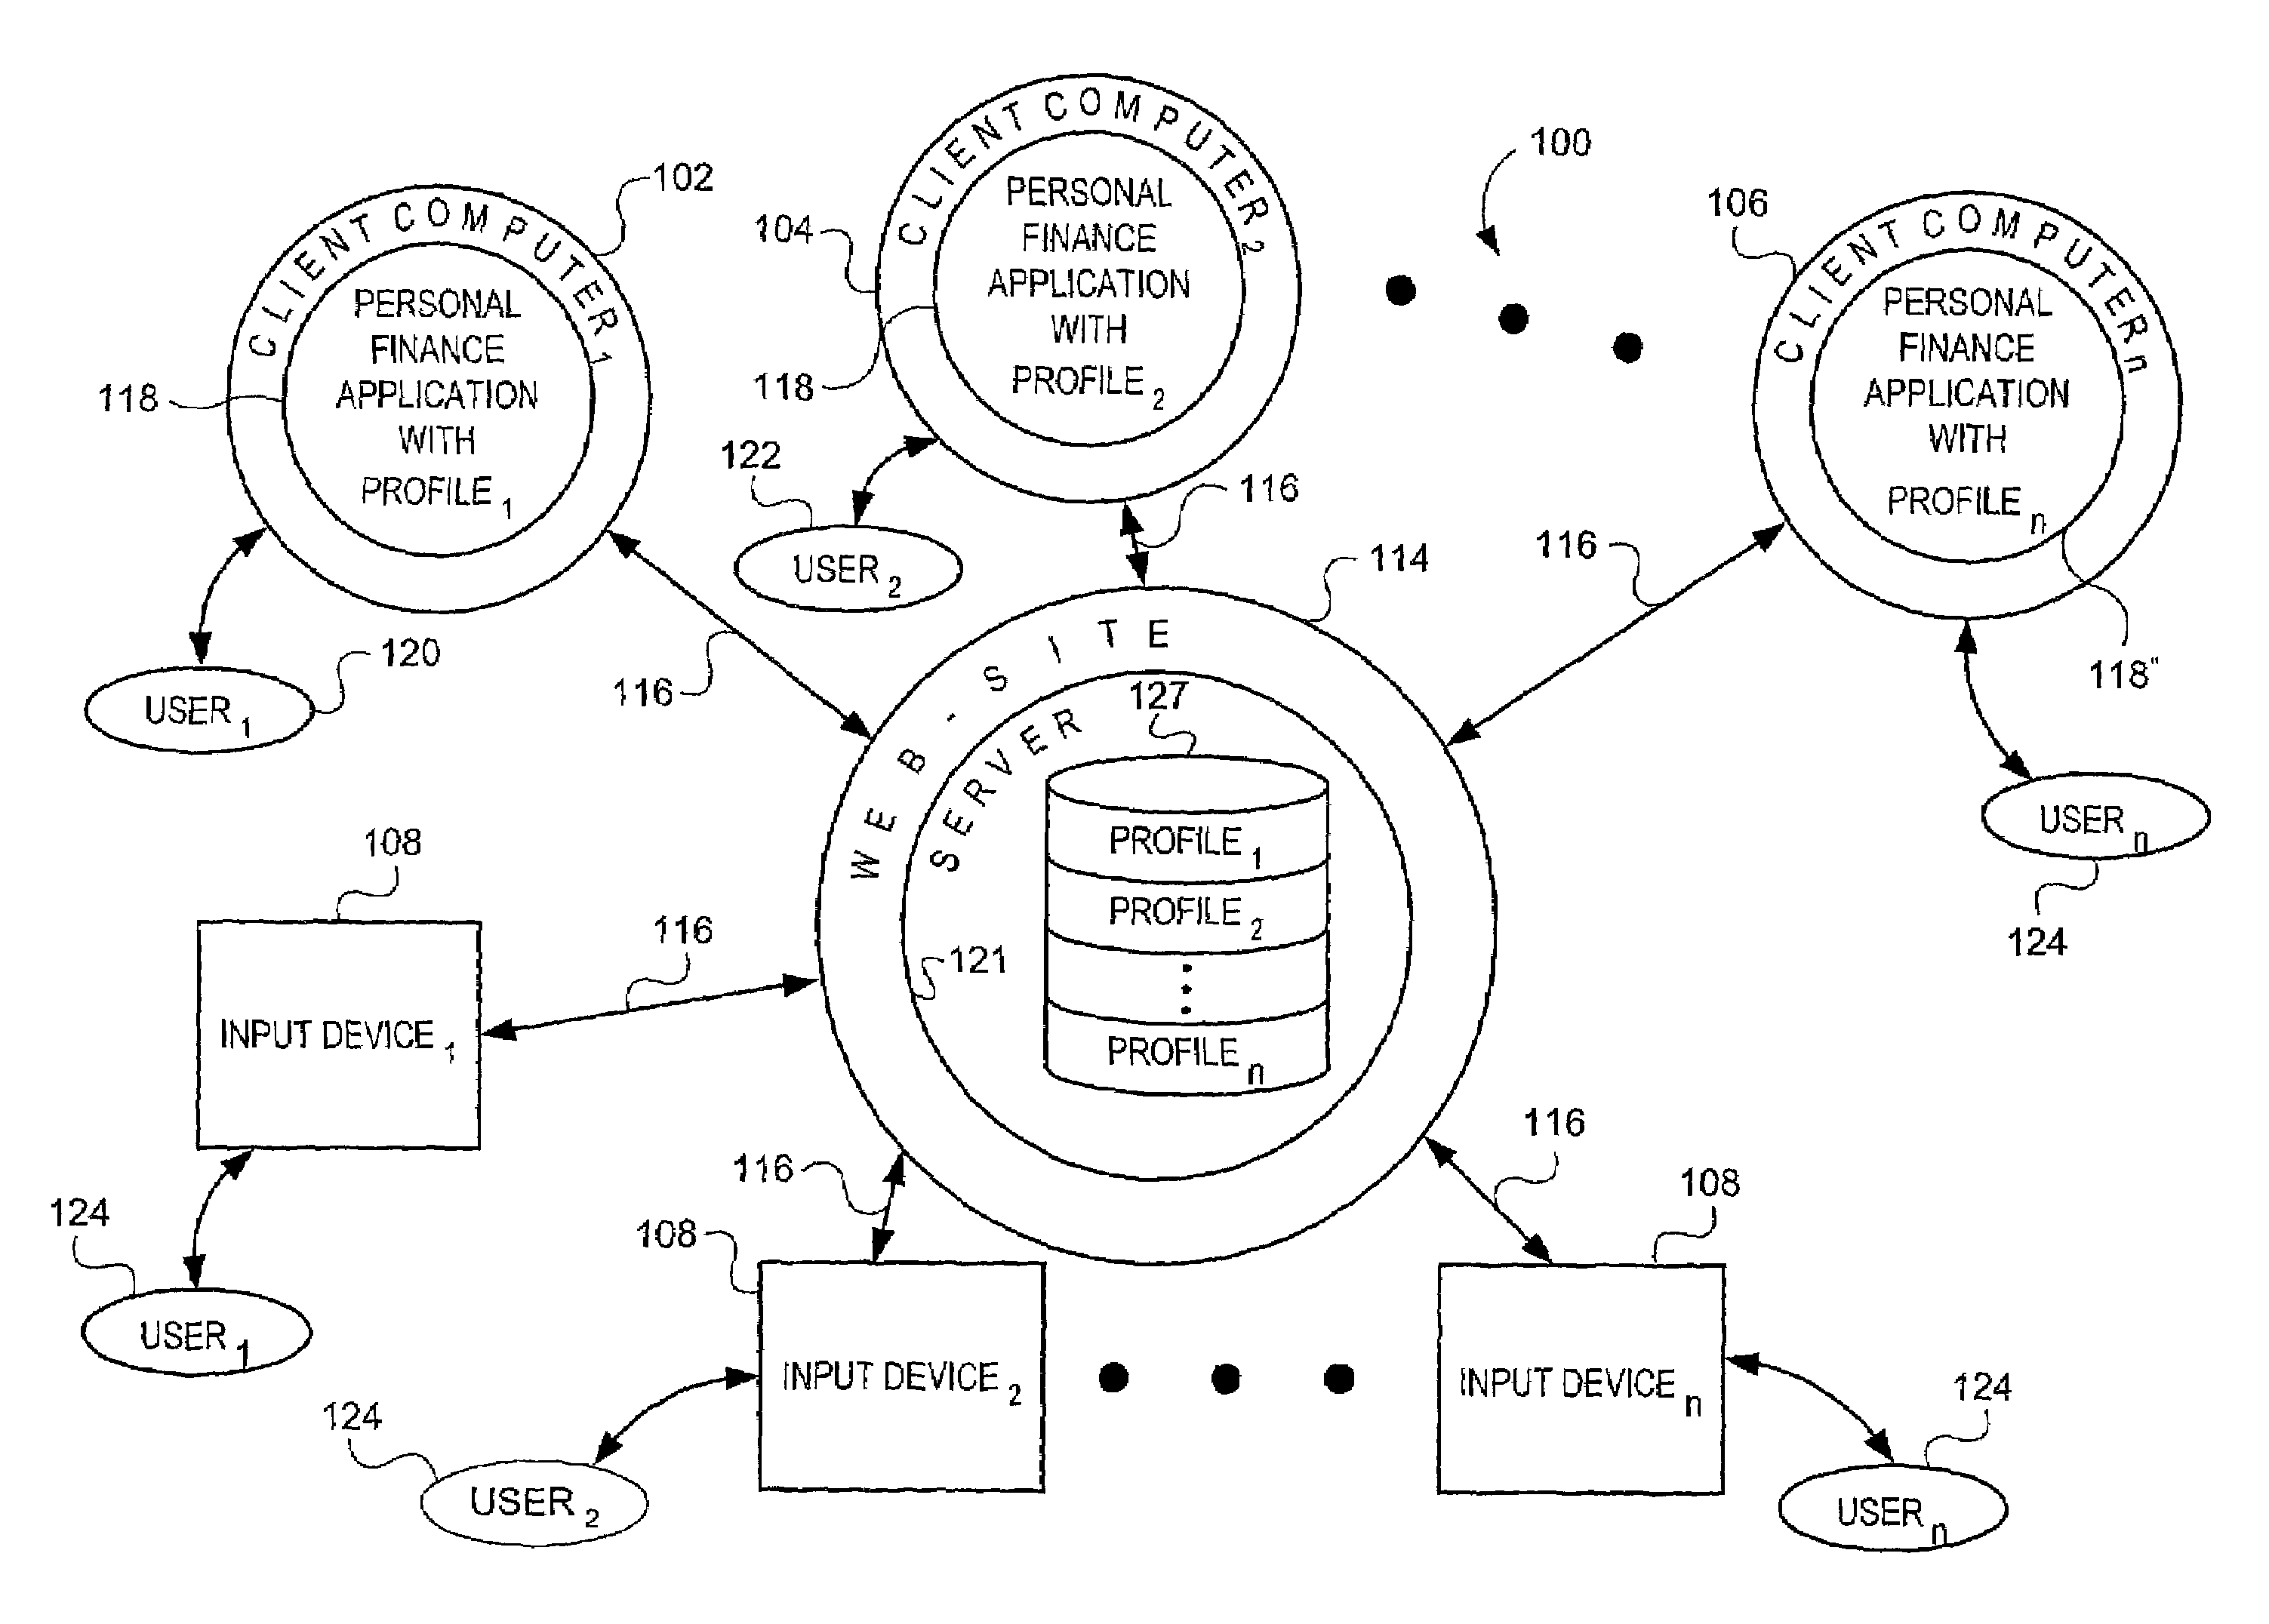 Web-based entry of financial transaction information and subsequent download of such information